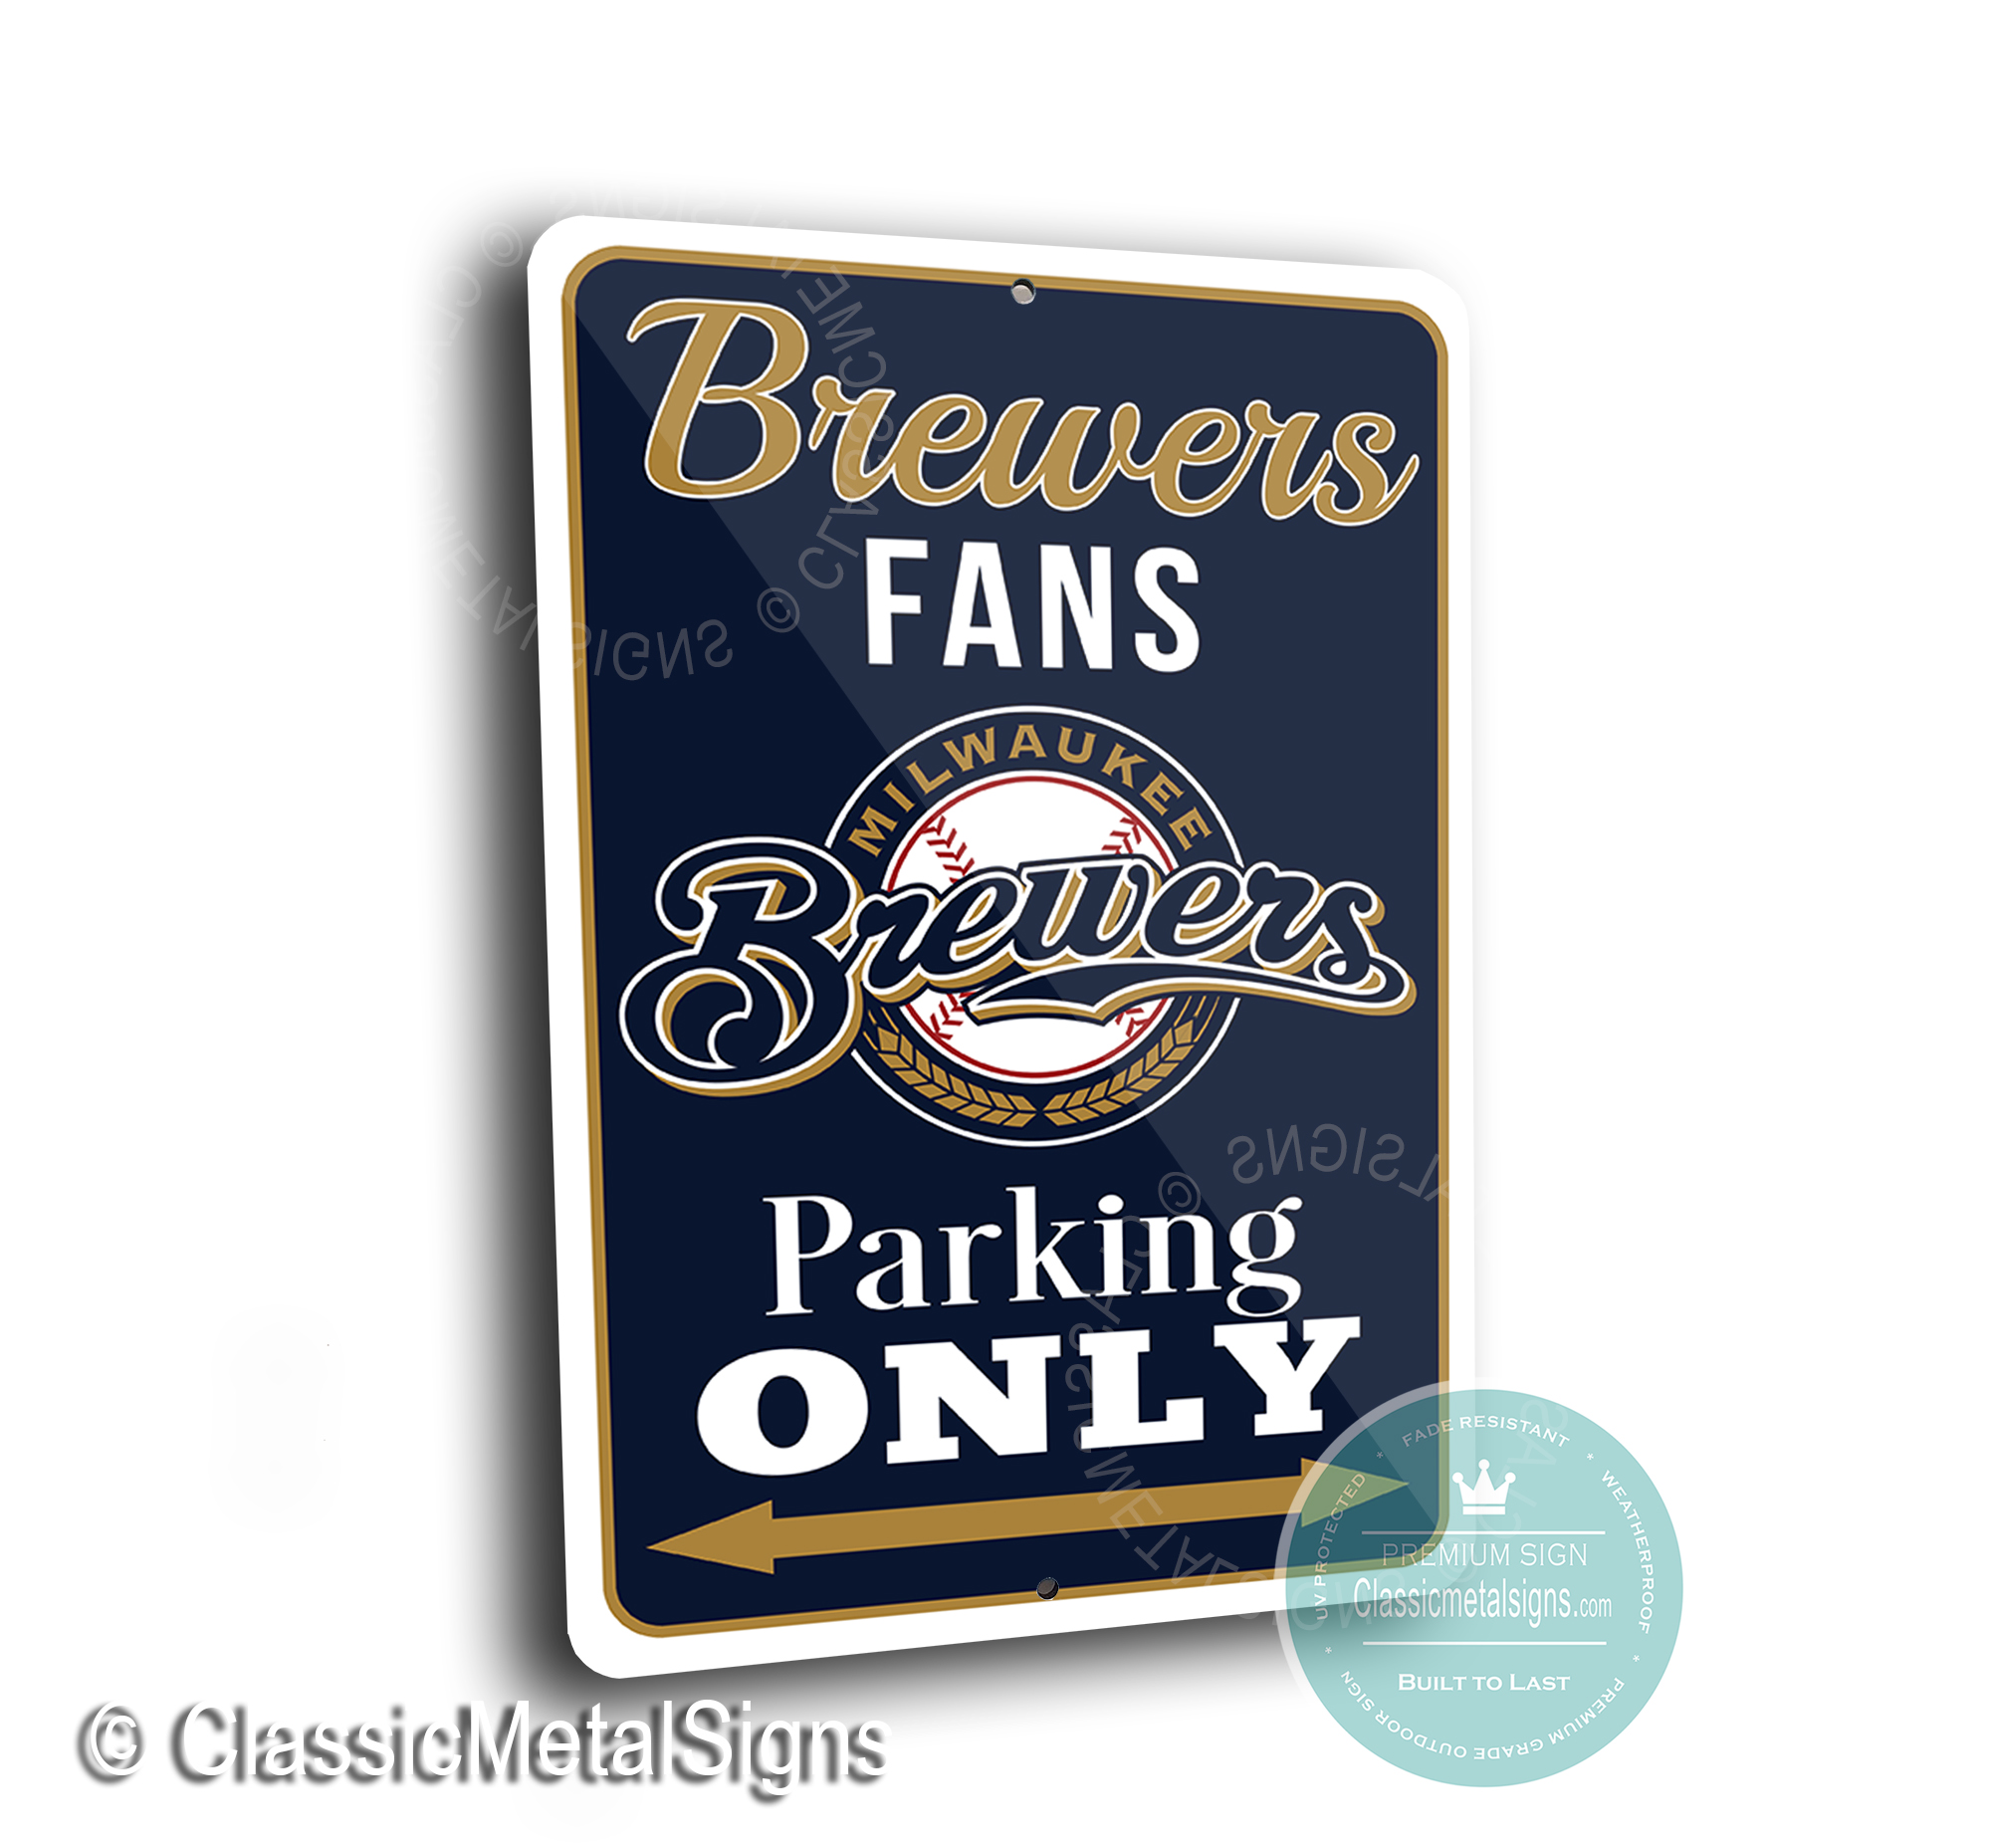 Brewers Parking Only sign